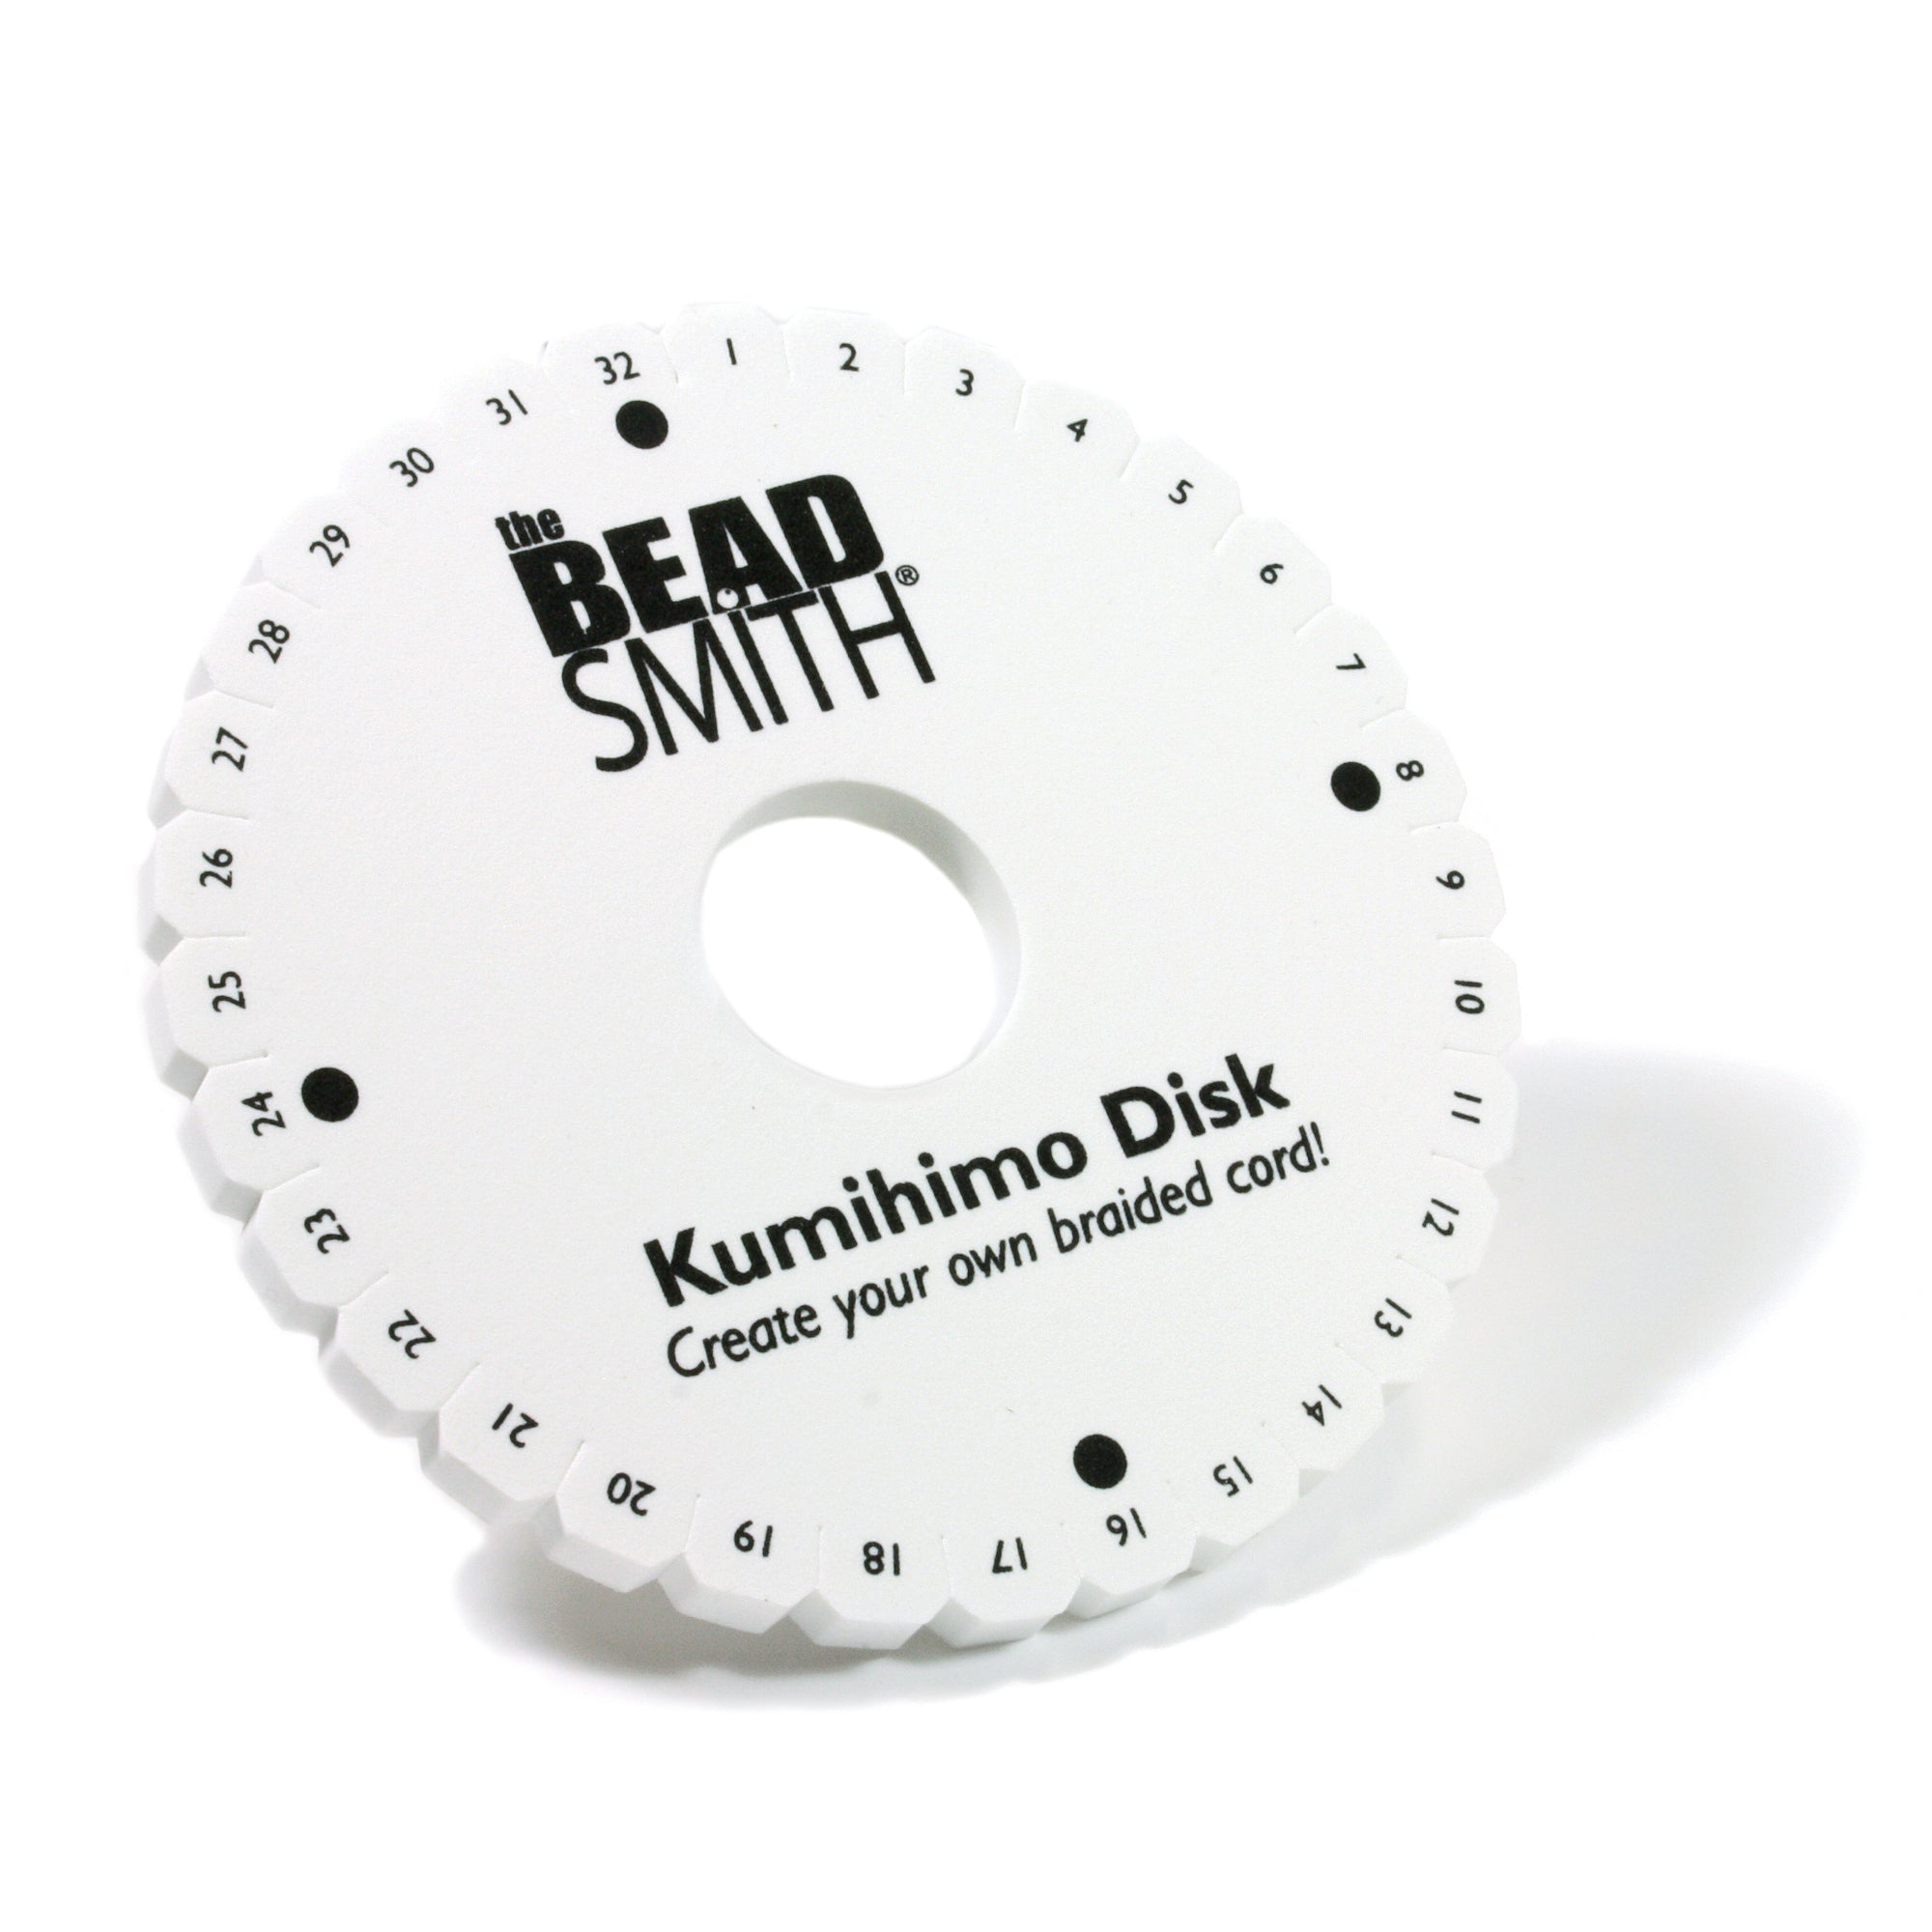 Kumihimo Disk Photos, Images and Pictures